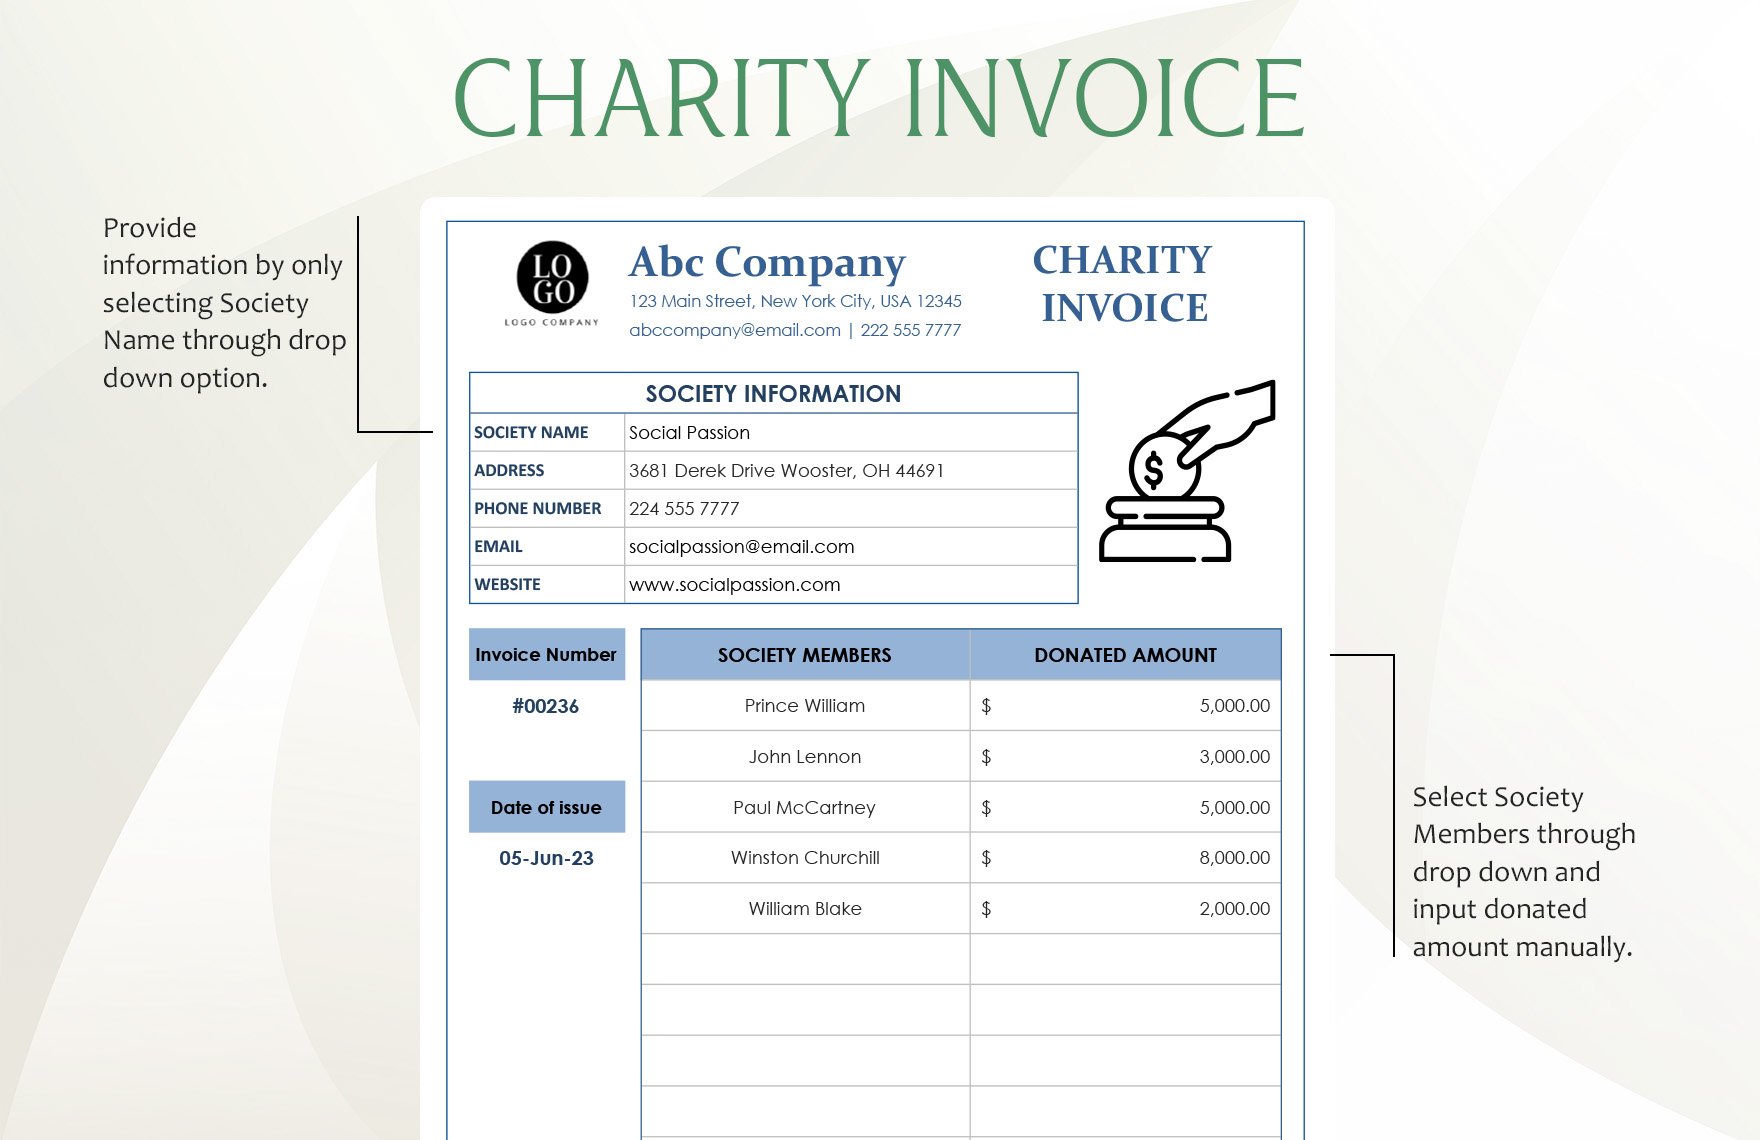 Charity Invoice Template